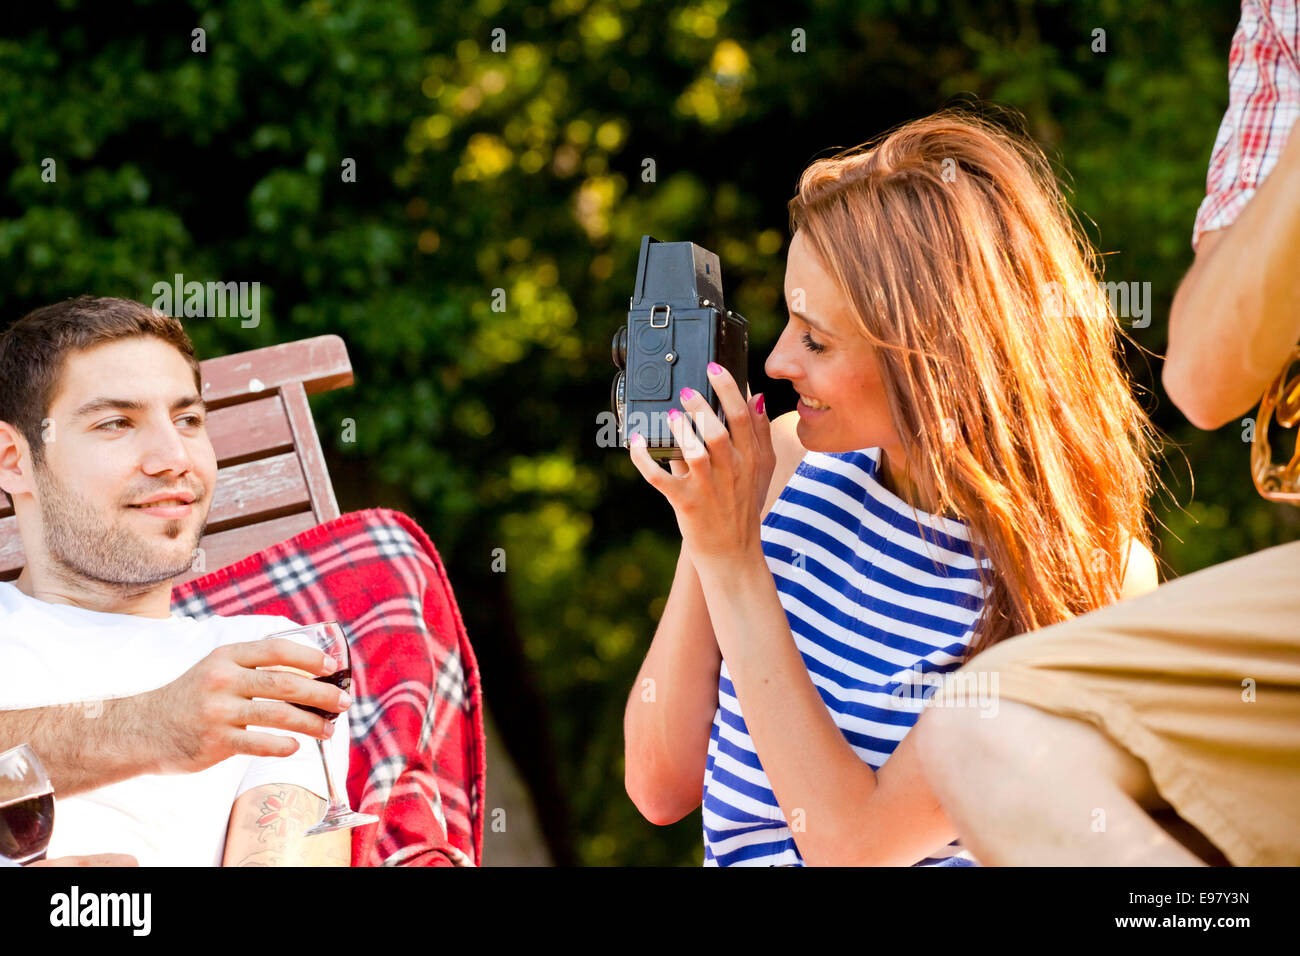 Young woman taking a picture of boyfriend outdoors Stock Photo